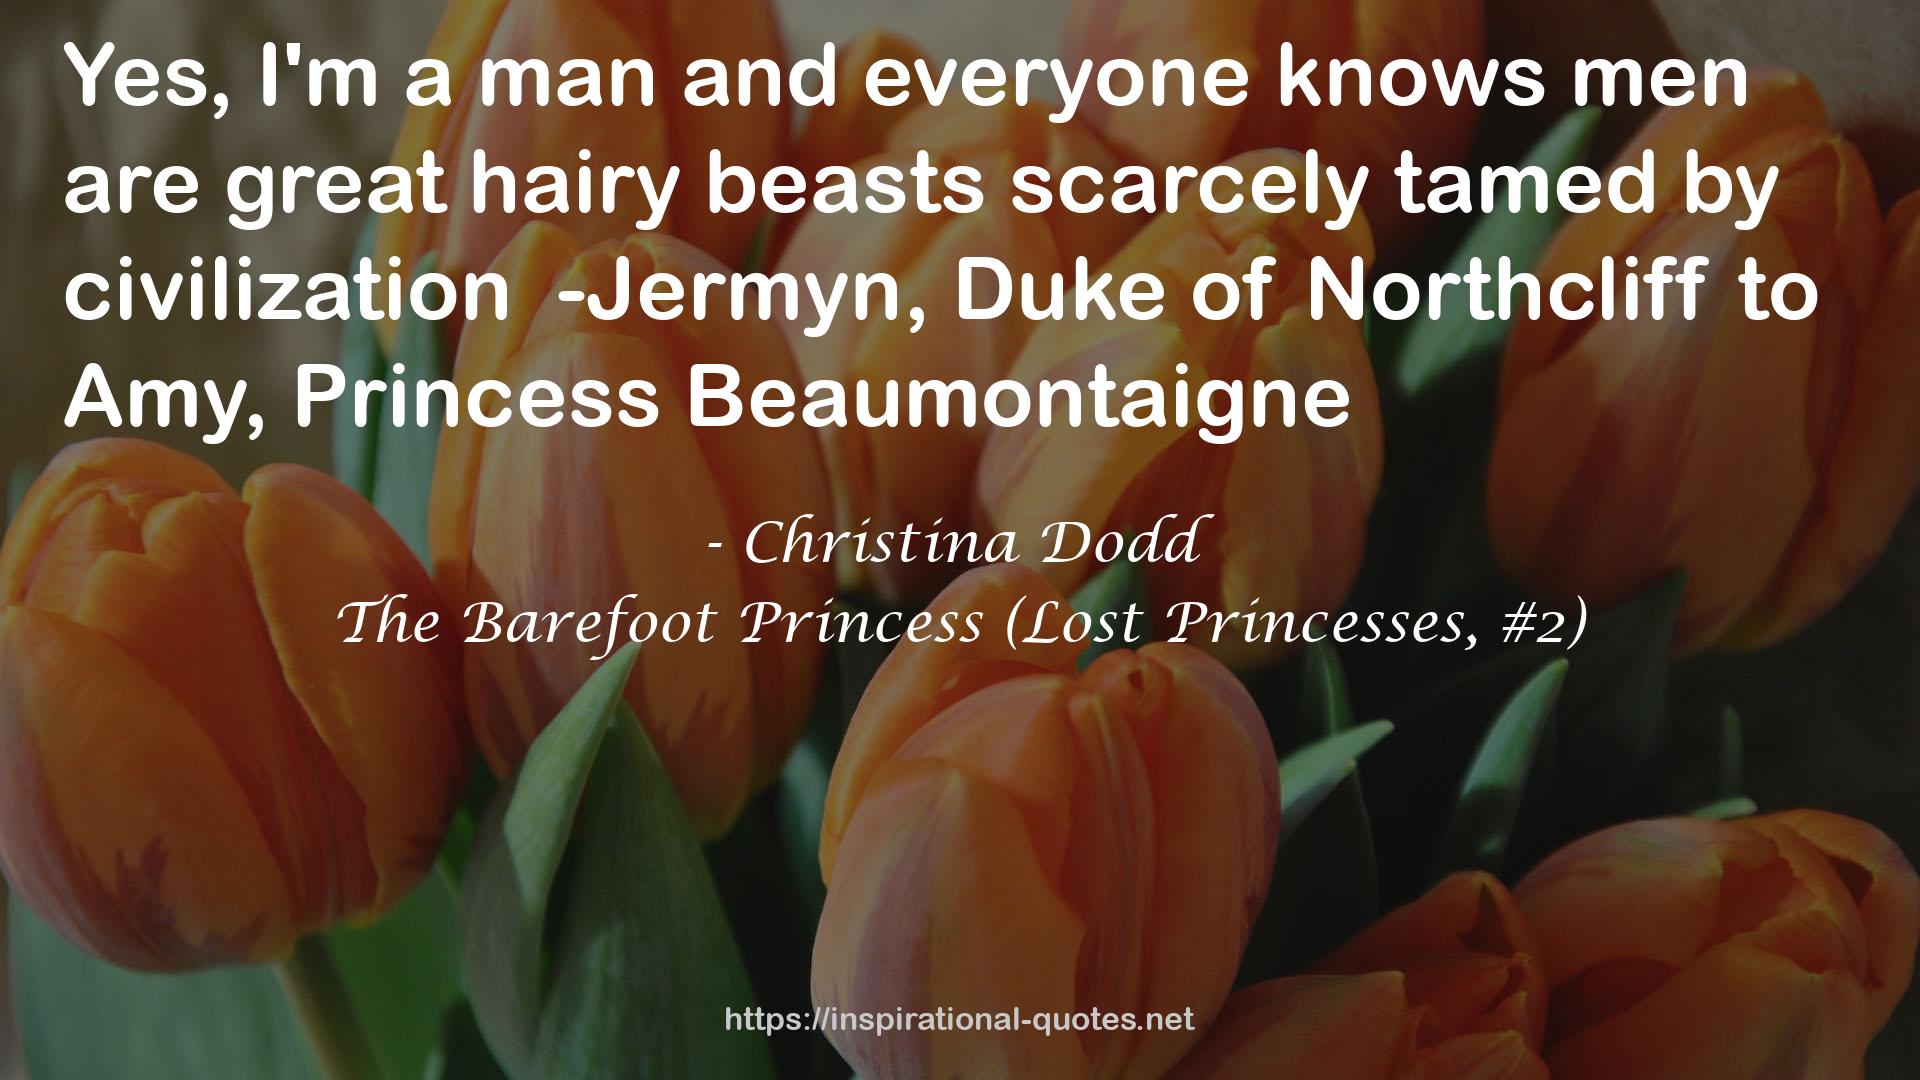 The Barefoot Princess (Lost Princesses, #2) QUOTES